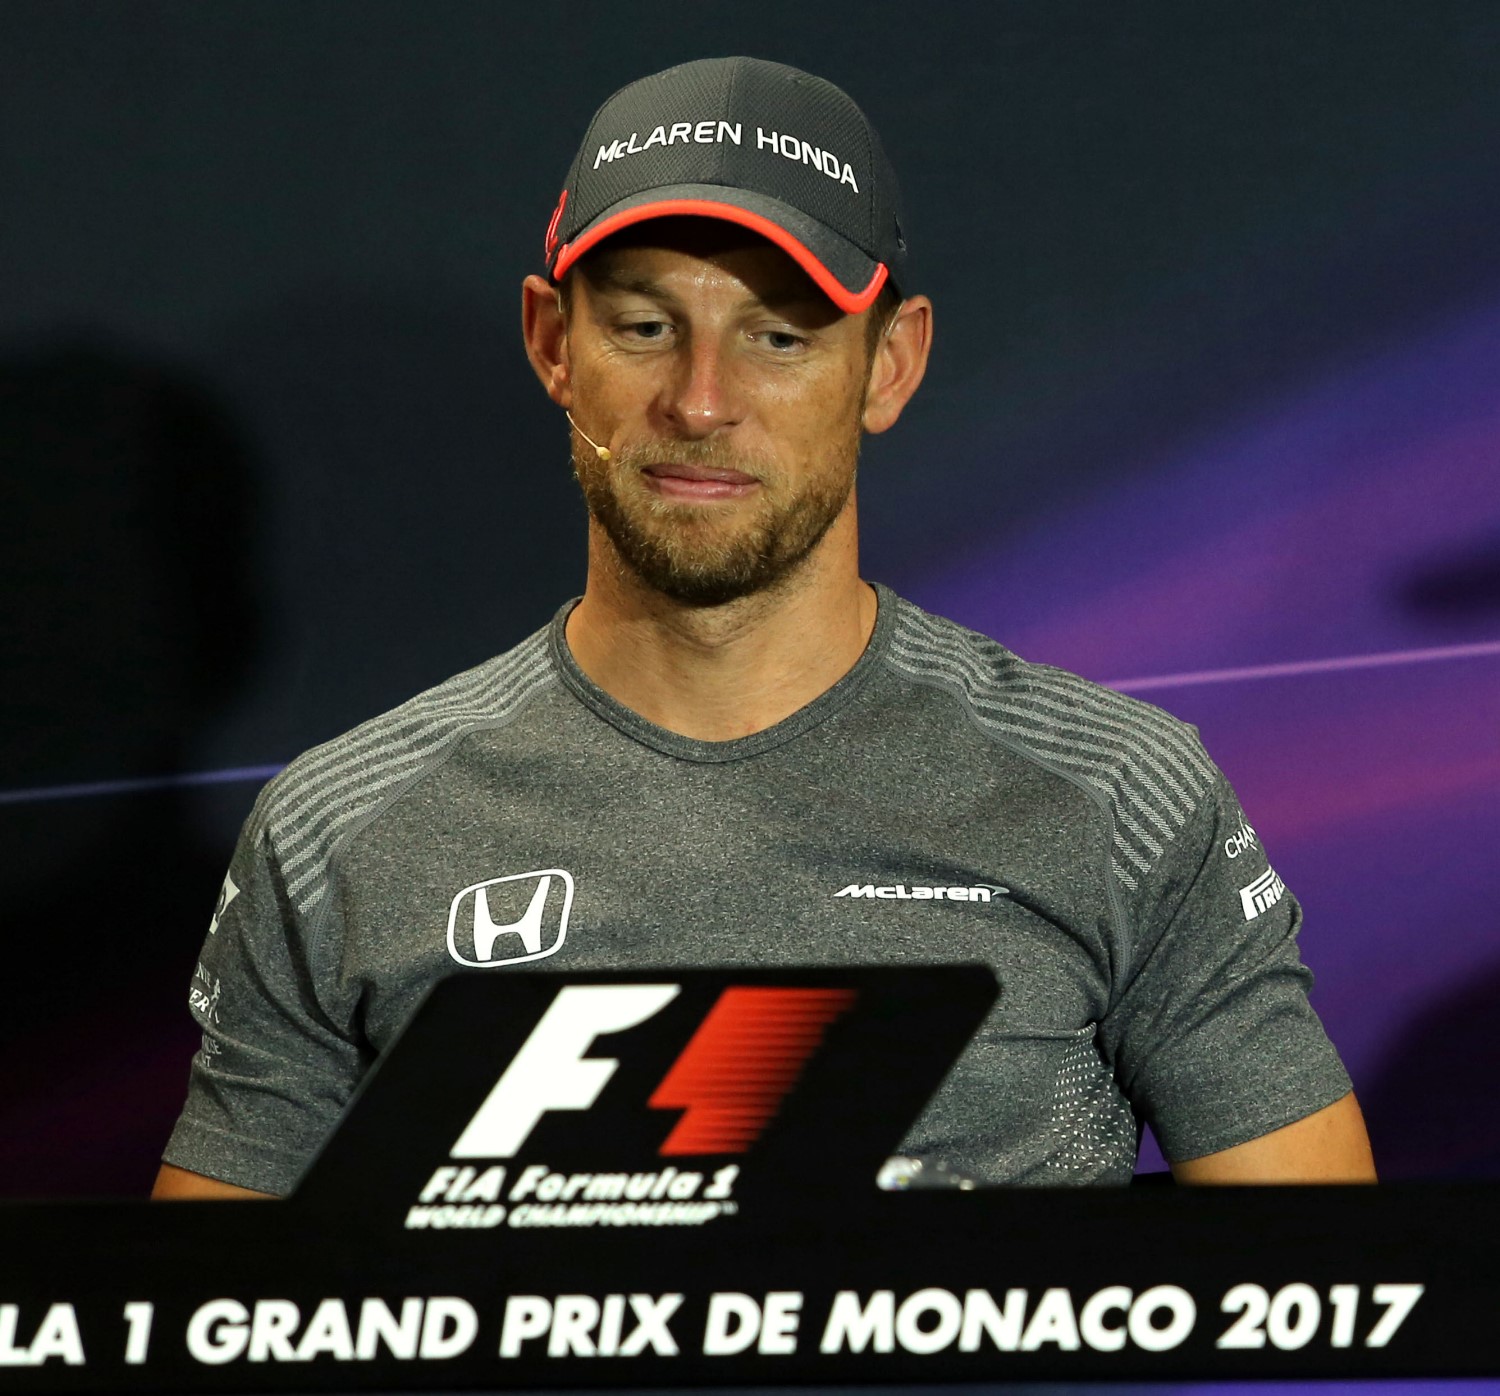 Jenso Button was eyeing an IndyCar go before the Chinese Virus hit.